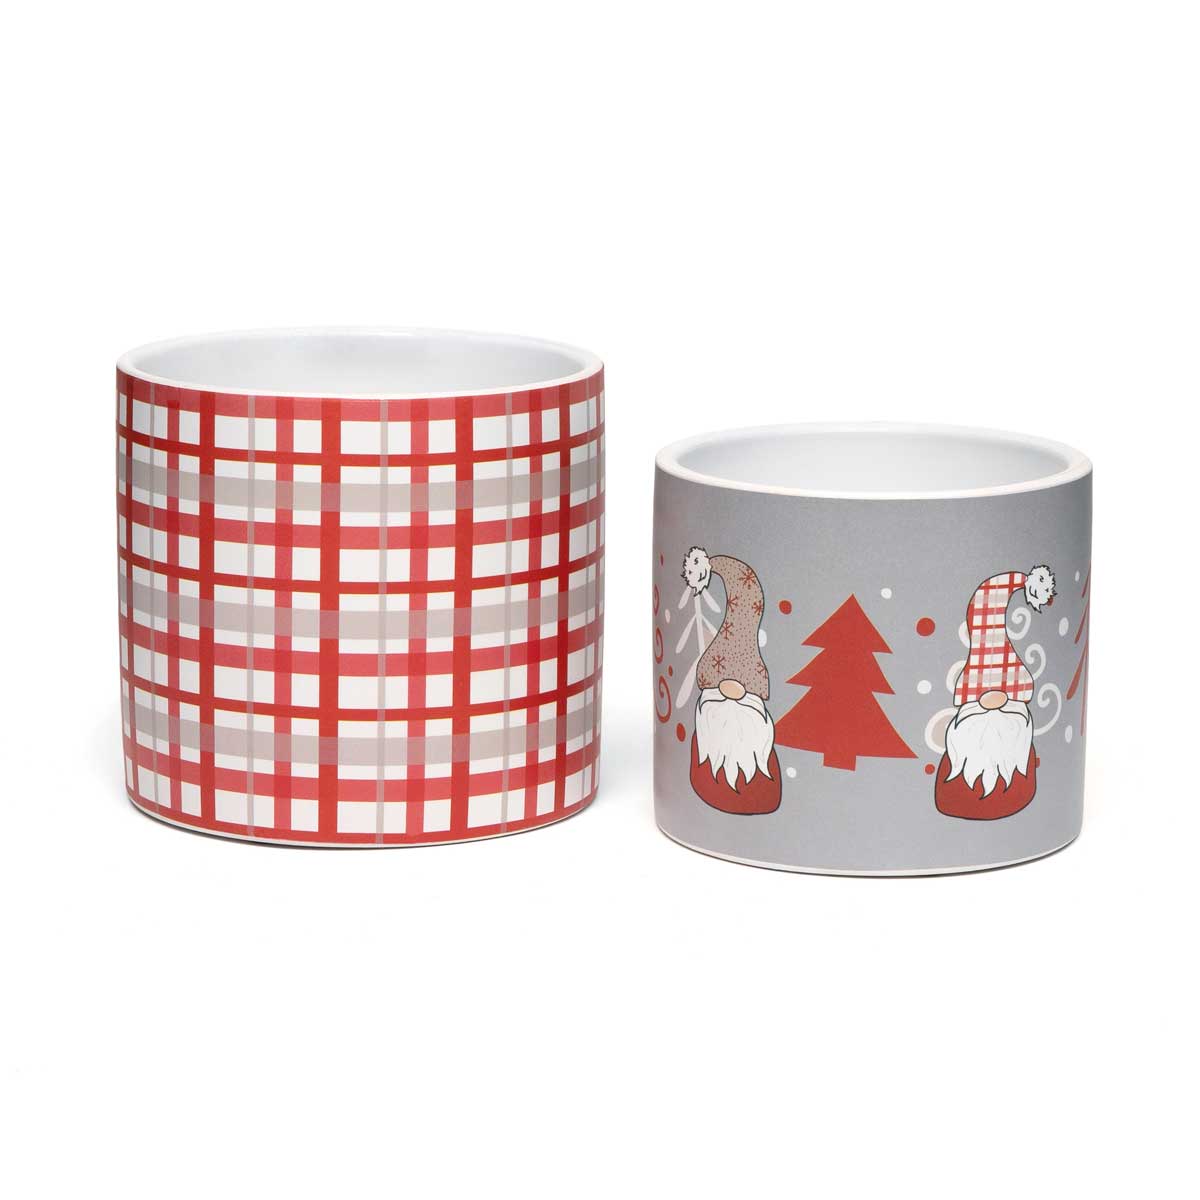 POT HOLIDAY PLAID LARGE 5.25IN X 4.75IN CERAMIC - Click Image to Close